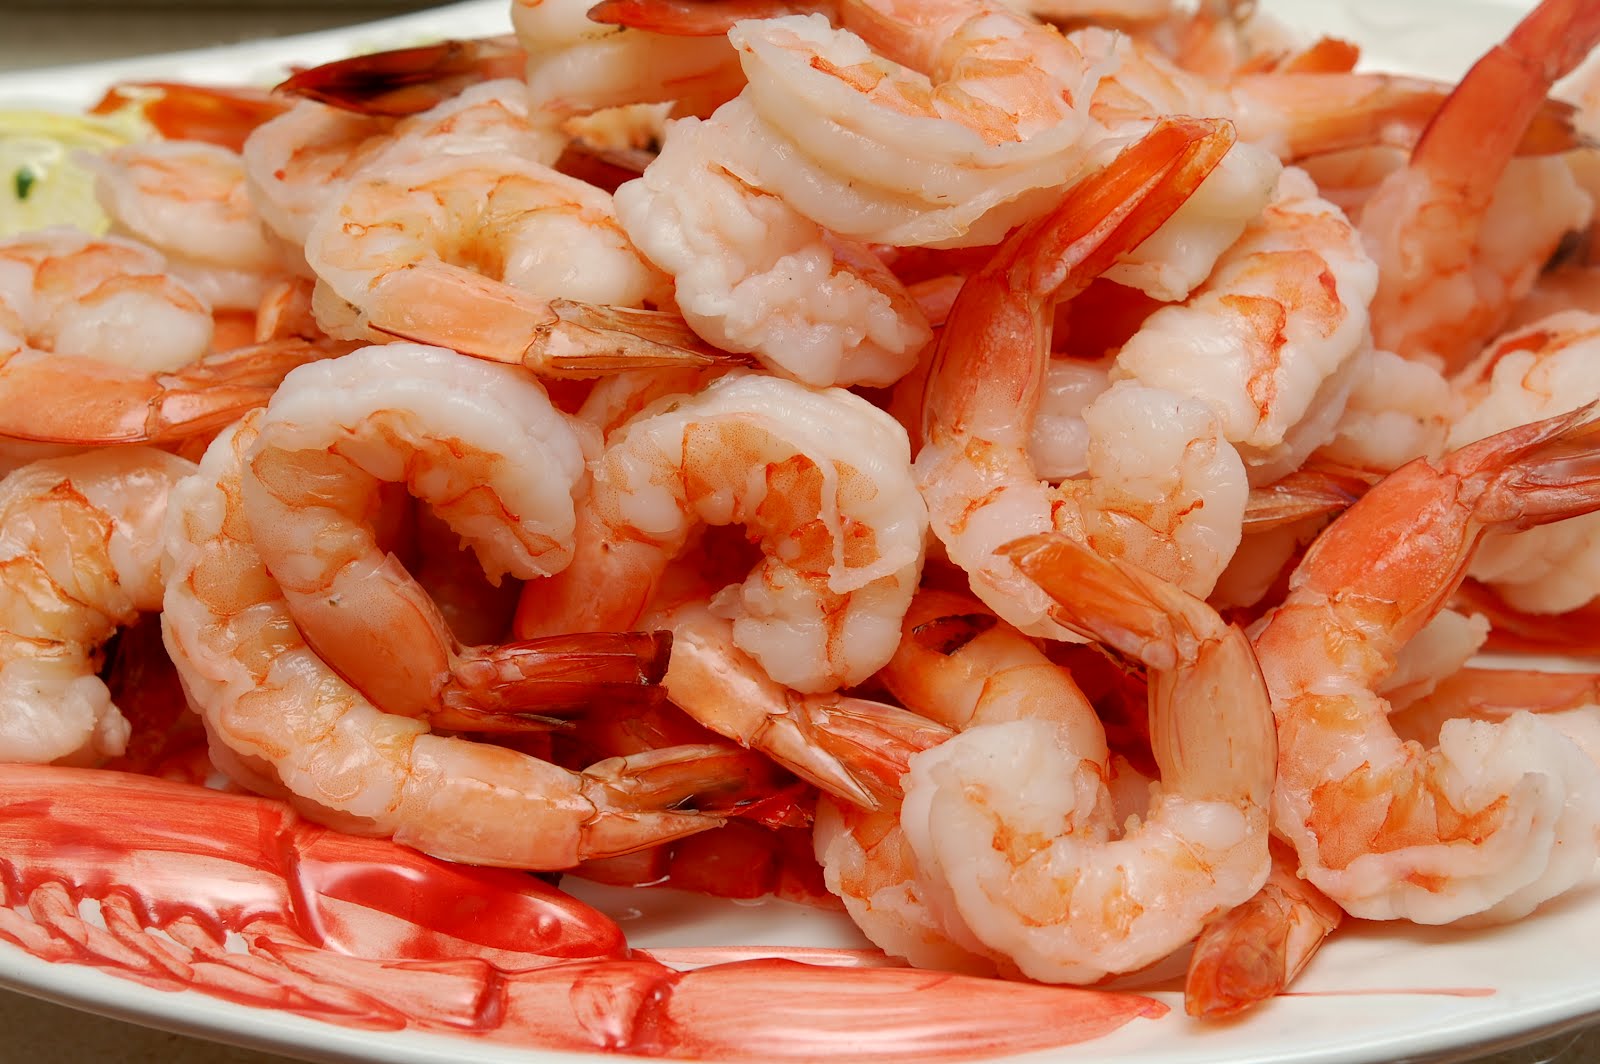 Shrimp-Salty & Spicy Style